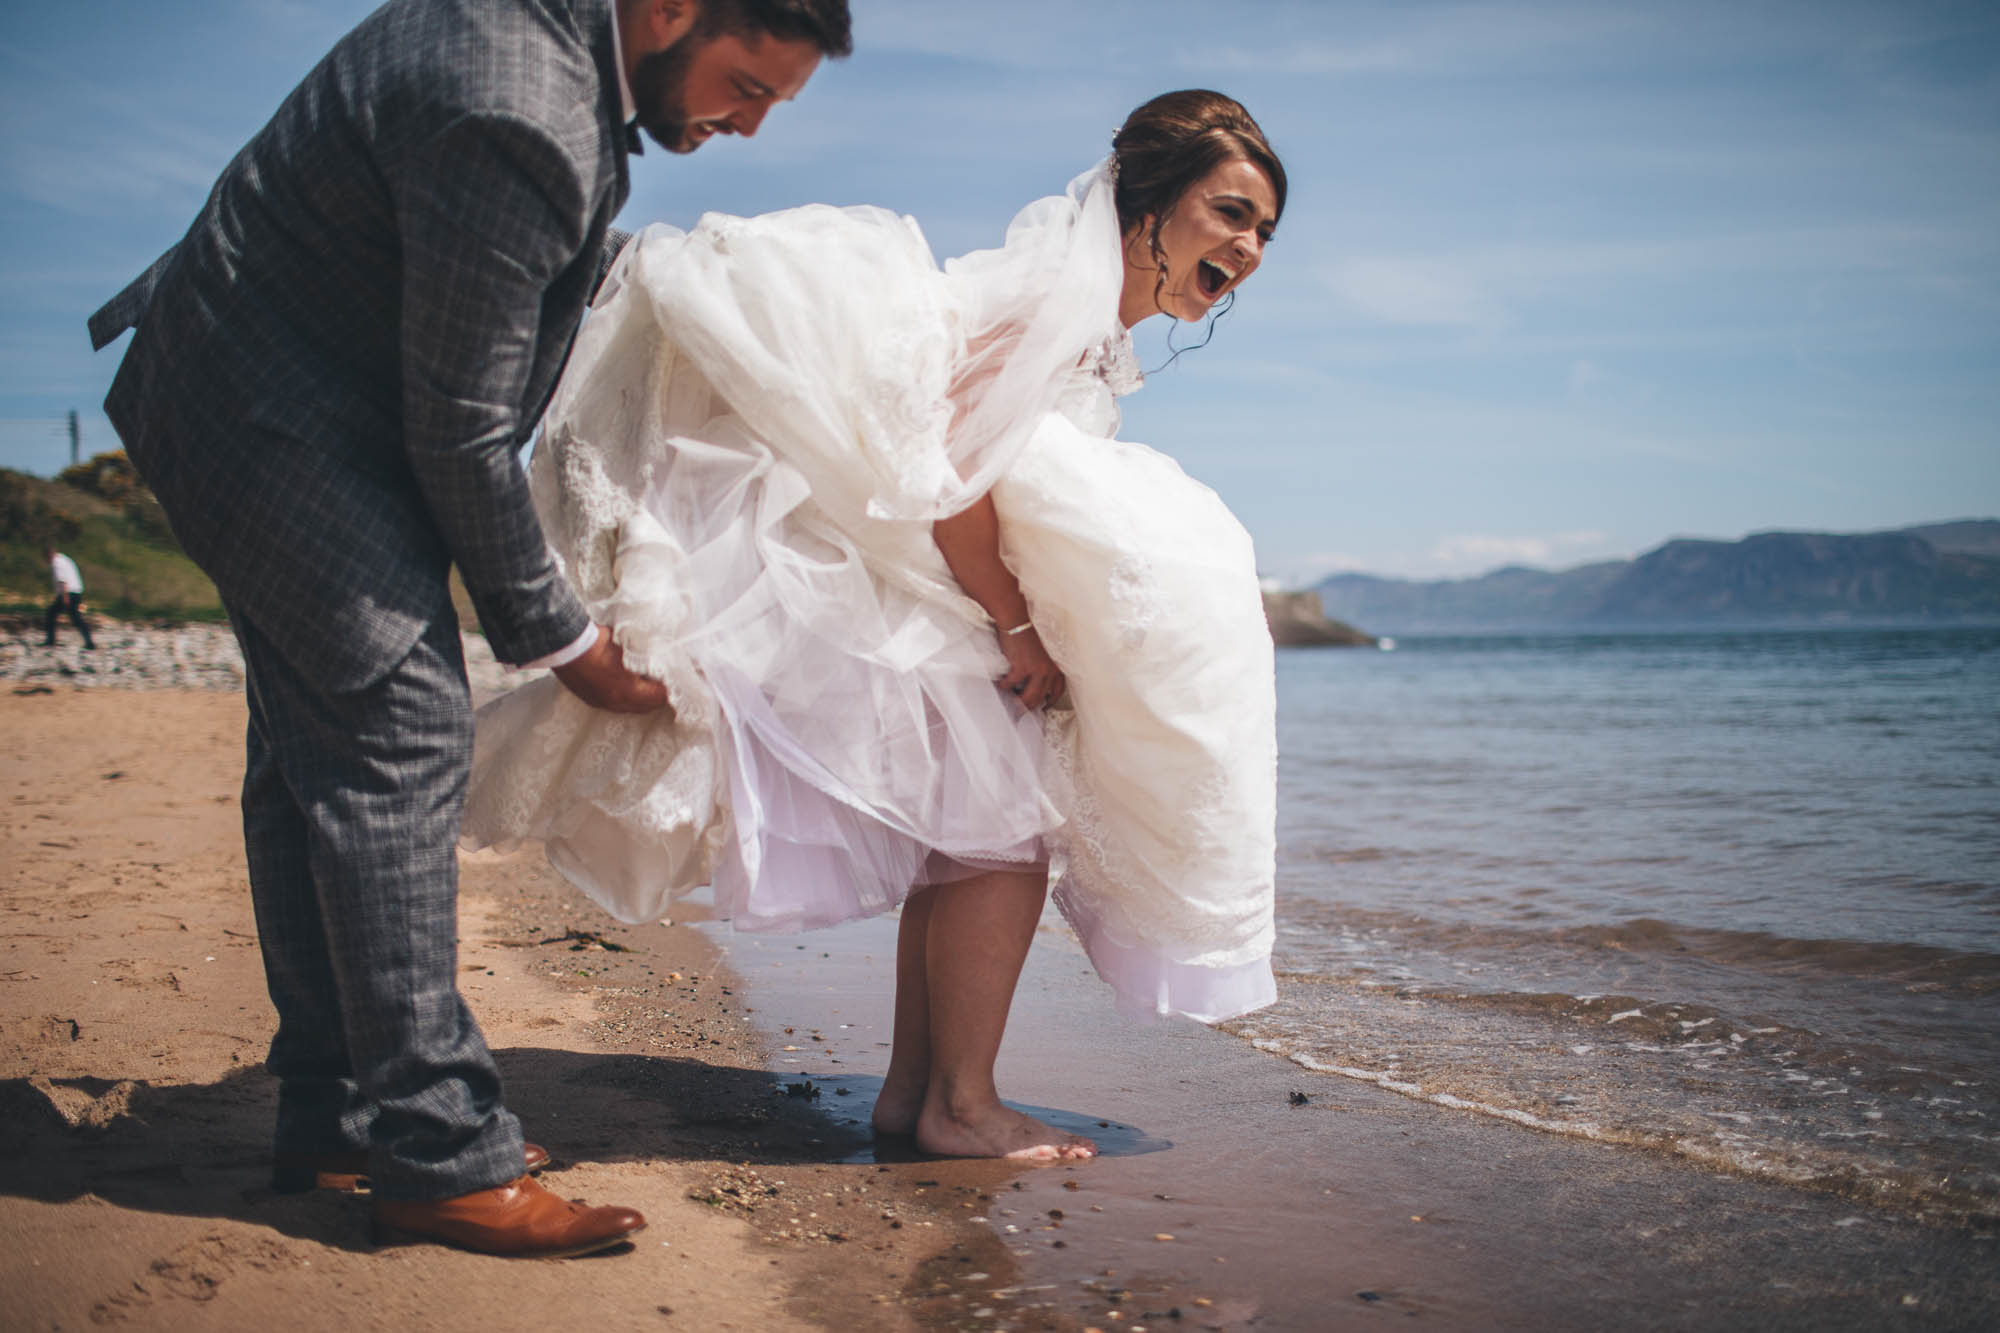 Groom helps to lift back of Bride's wedding dress as she laughs and goes for a paddle in the seaside